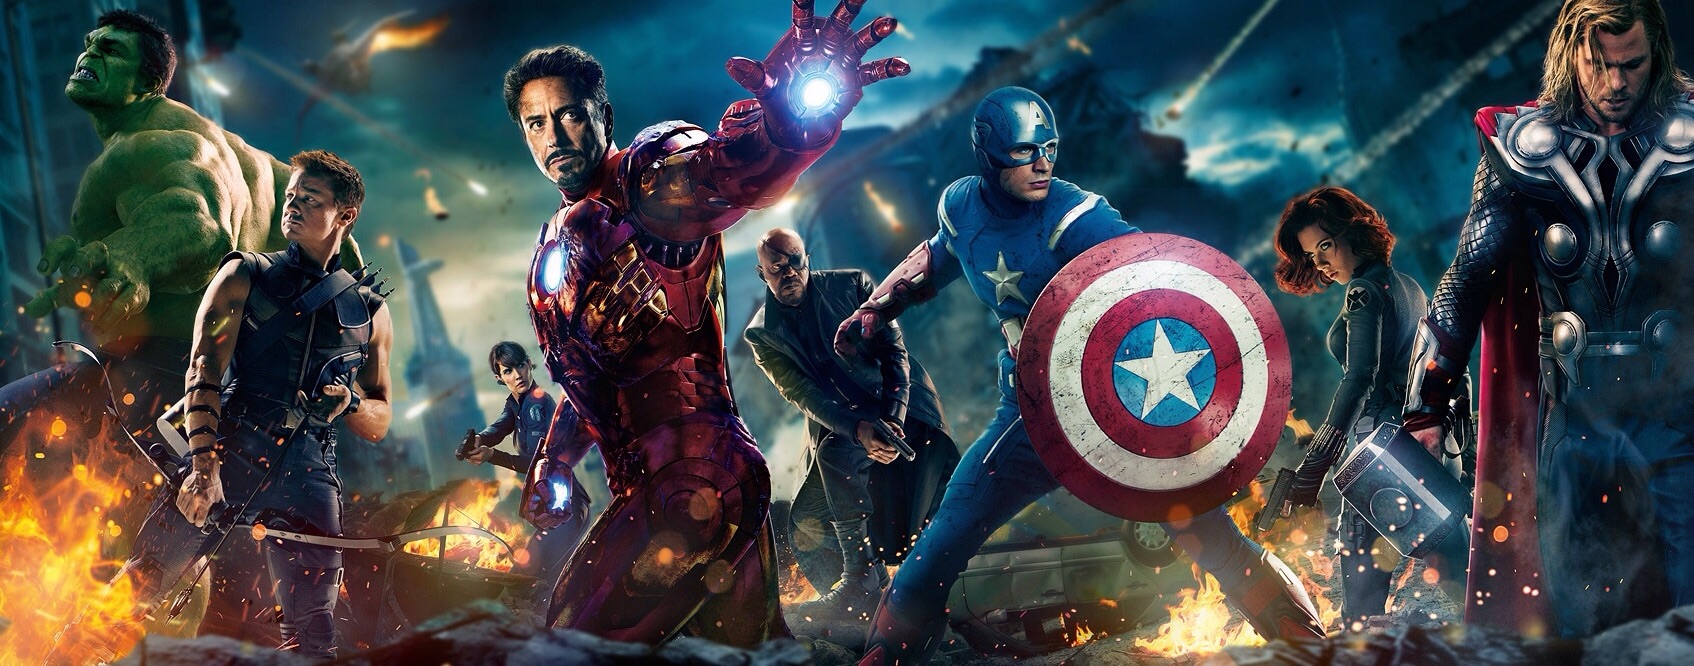 AVENGERS ASSEMBLE Blu-ray Steelbook in the UK is being released from Zavvi